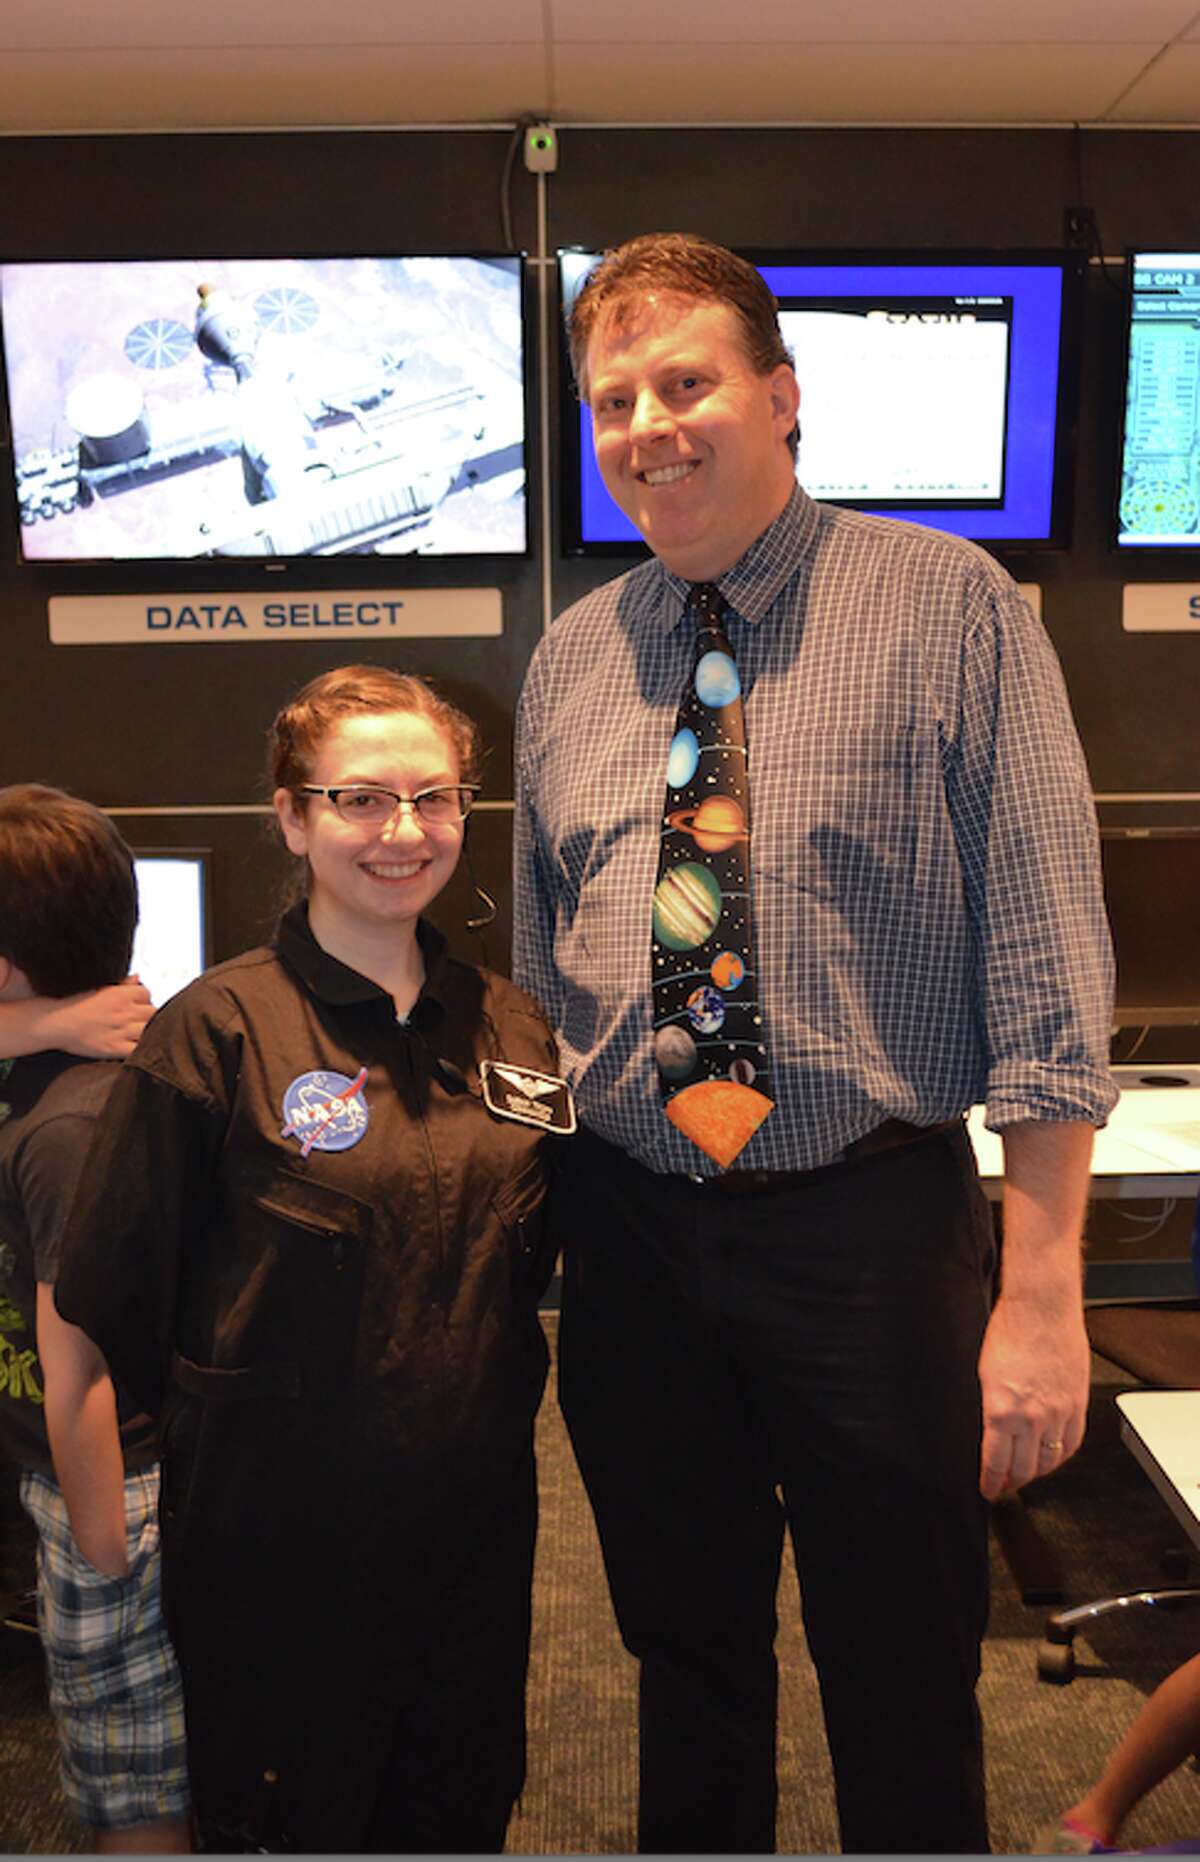 Trumbull native Sarah Tropp reunites with her fifth grade teacher, Steve Spillane, at the Challenger Learning Center in the Discovery Museum and Planetarium in Bridgeport earlier this spring.